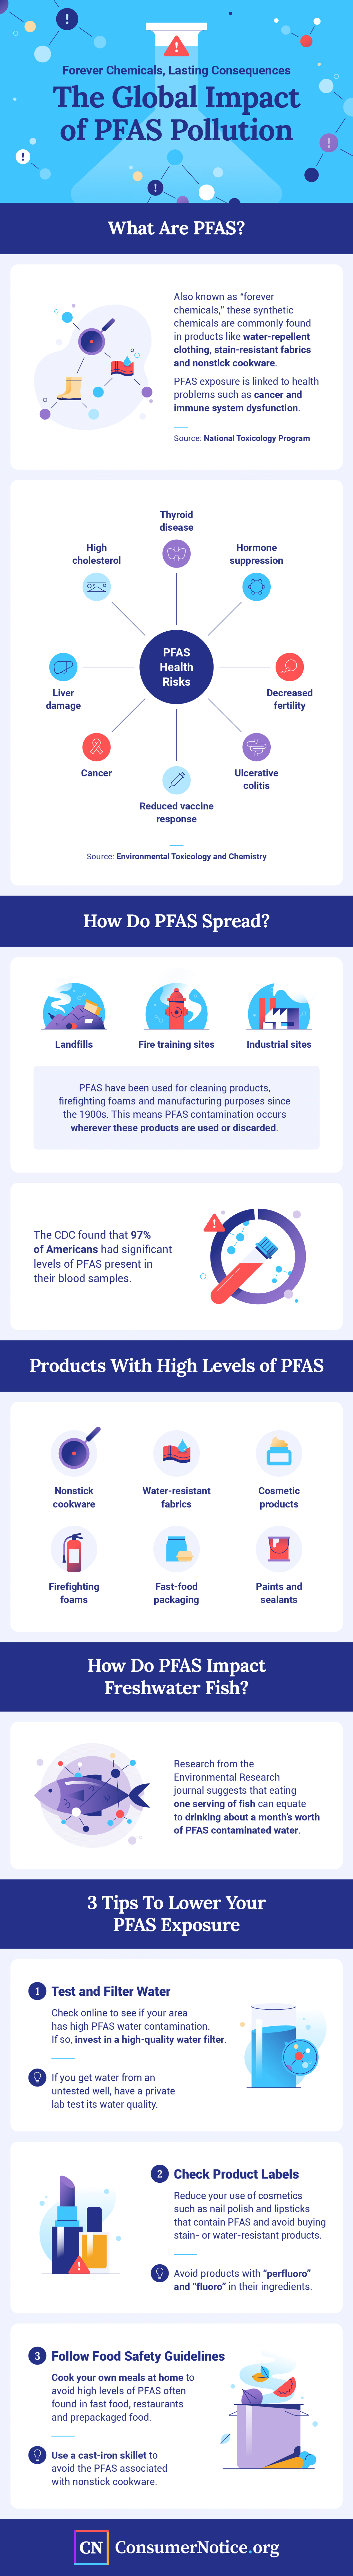 https://www.consumernotice.org/wp-content/uploads/global-impact-of-pfas-pollution.png